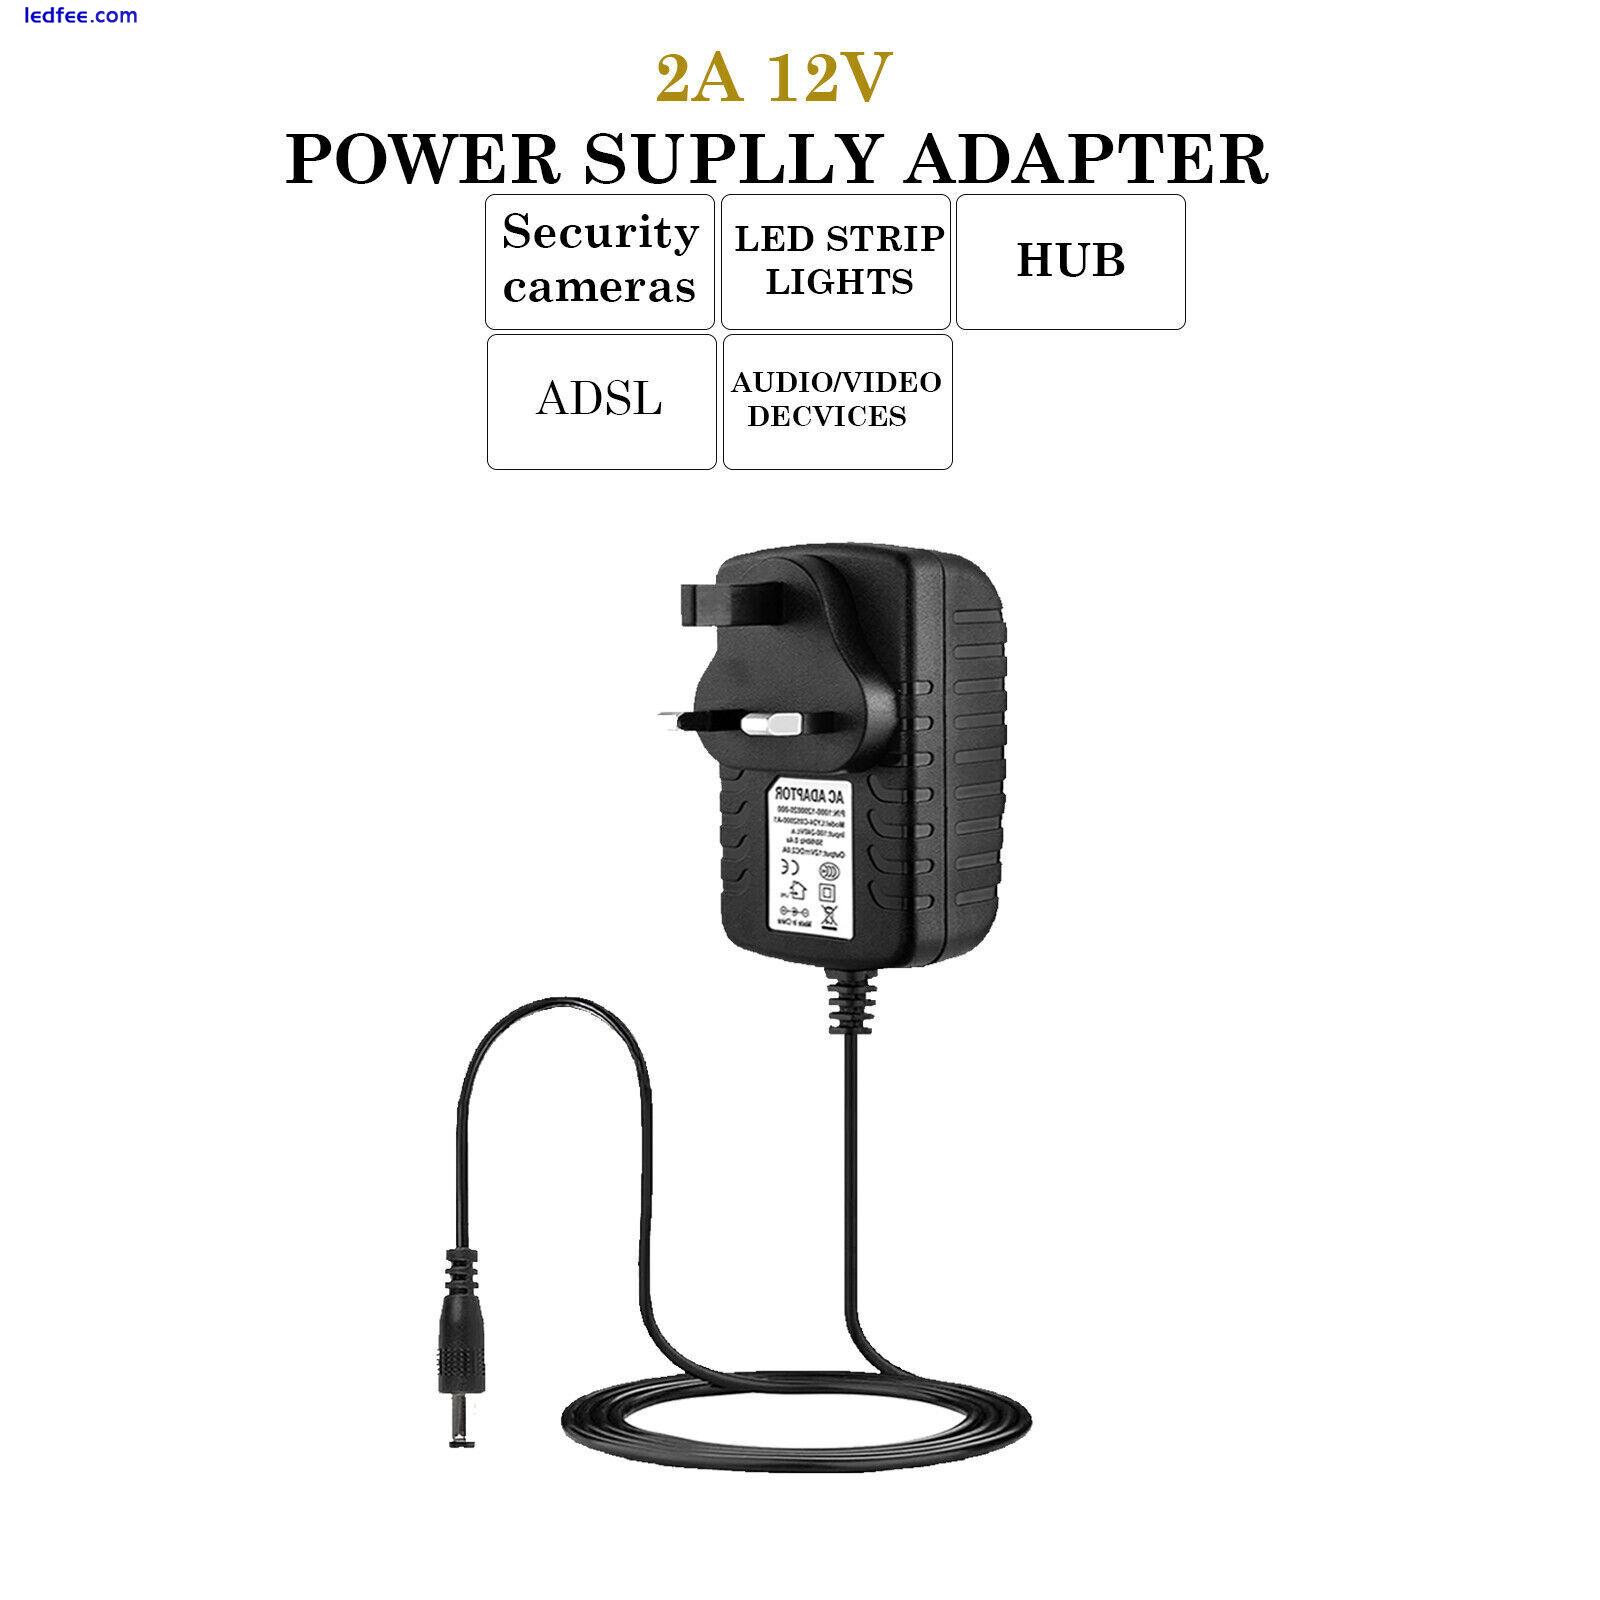 12V 1A-3A Adapter AC/DC UK Power Supply Charger For LED Strip CCTV Camera 1 